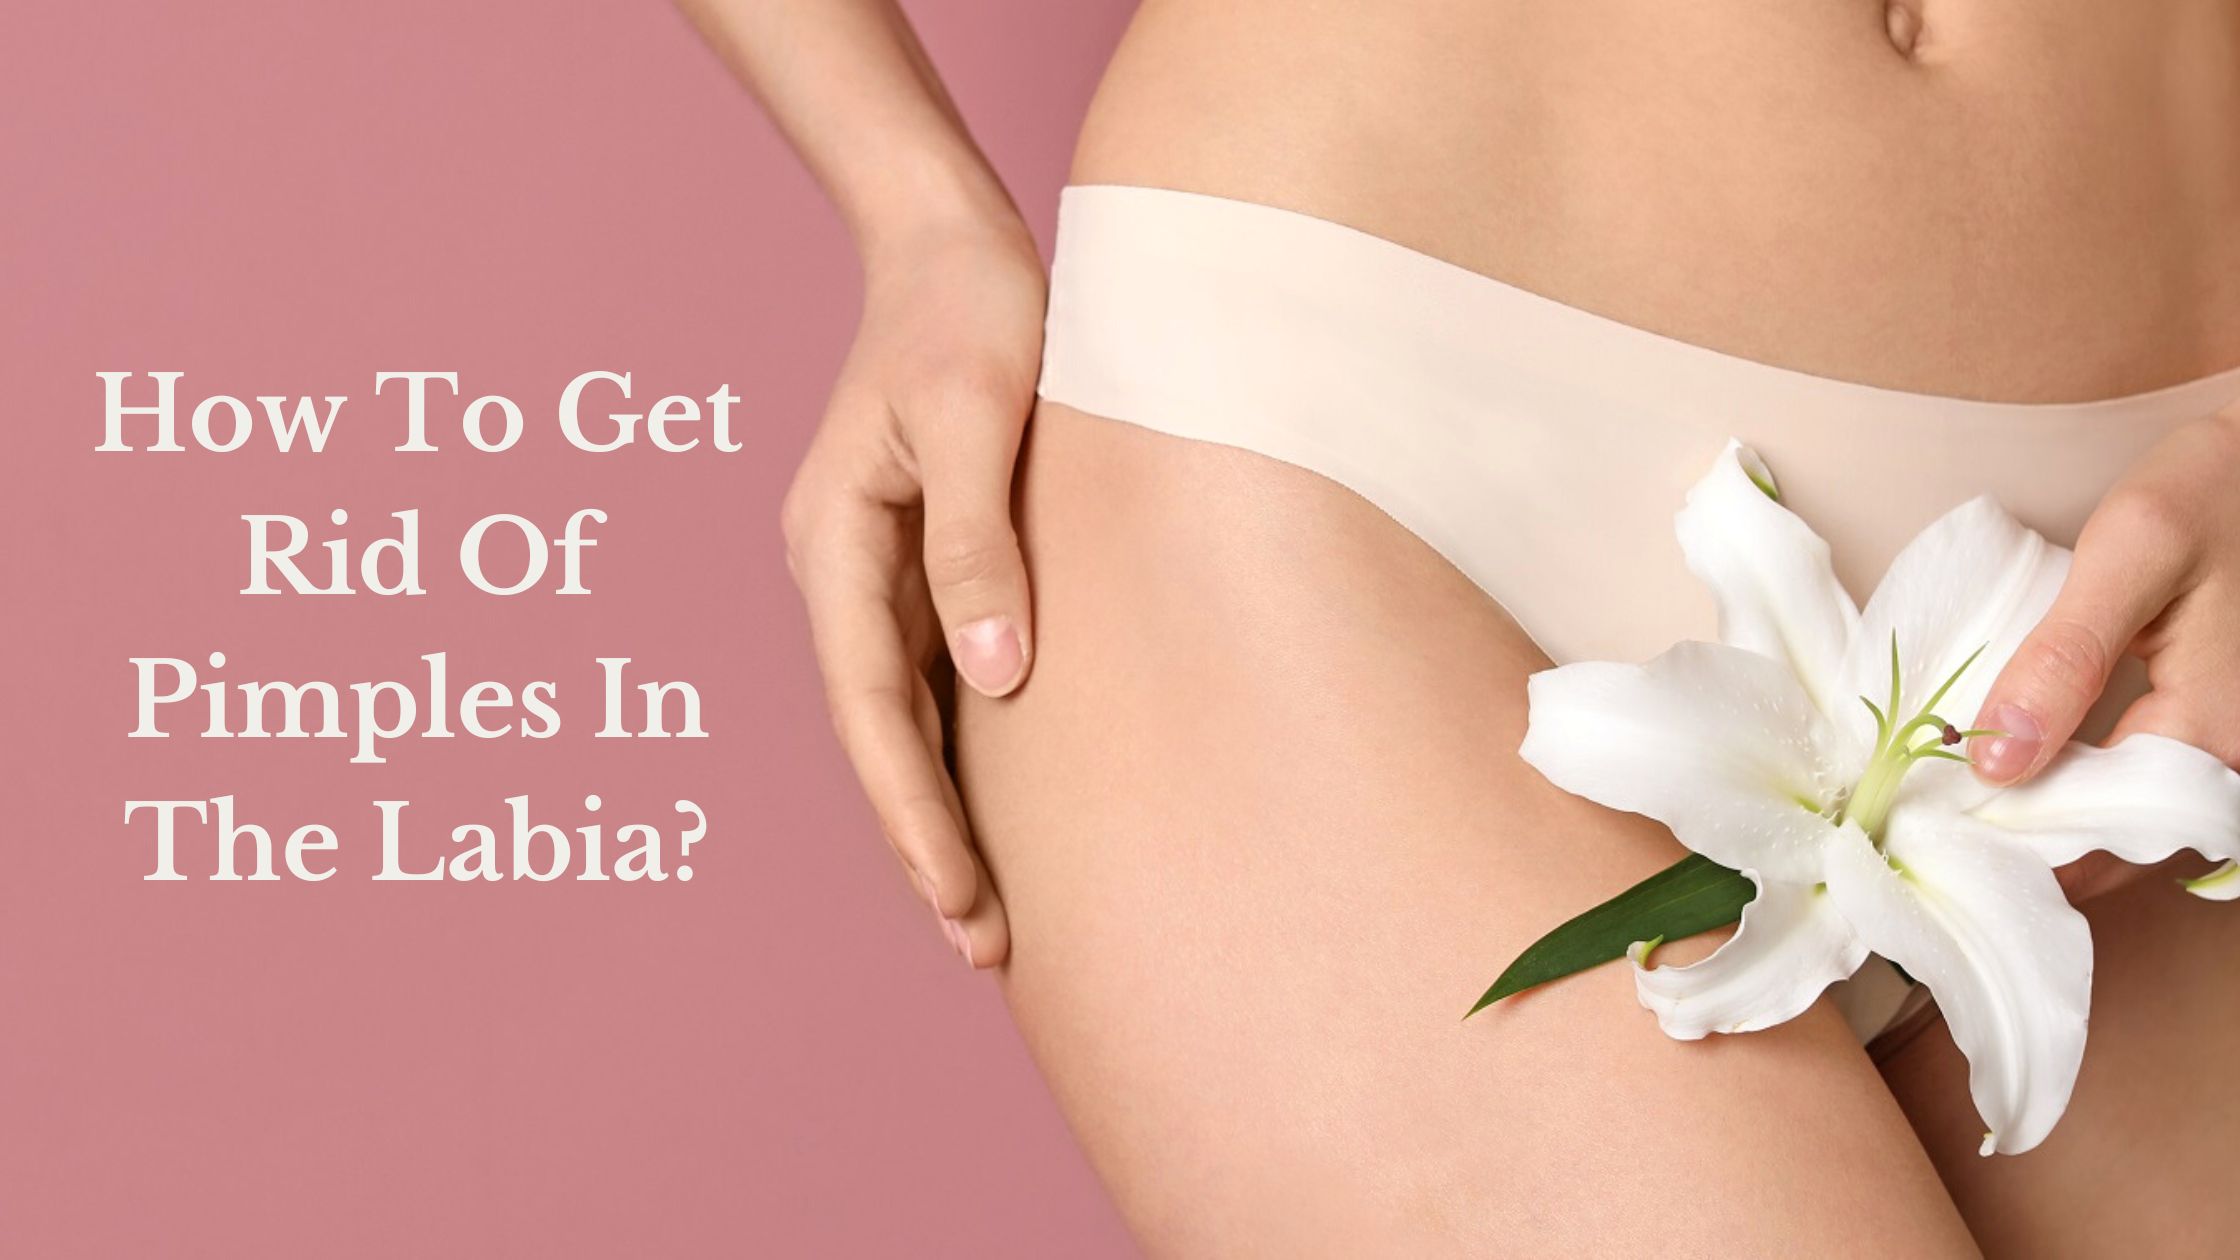 How To Get Rid Of Pimples In The Labia